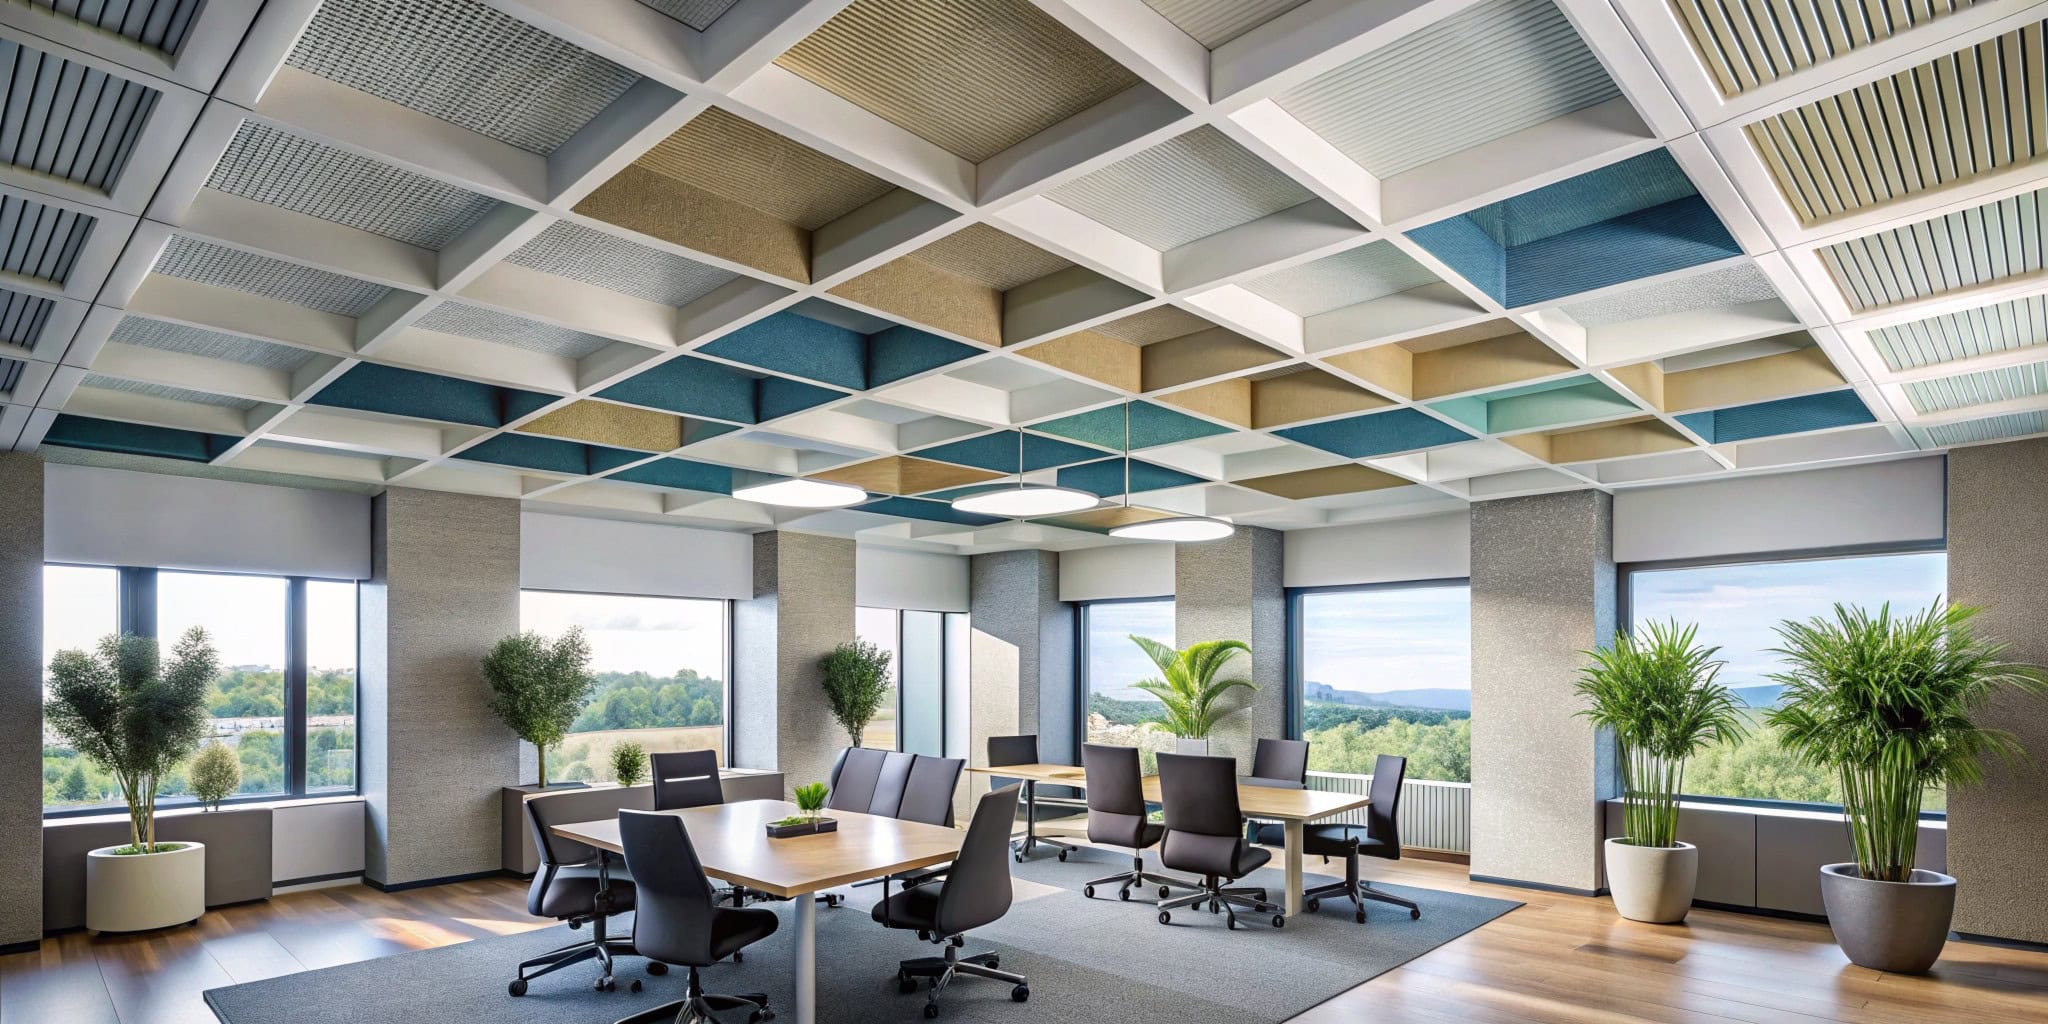 acoustic ceiling panels hanging from a ceiling tha